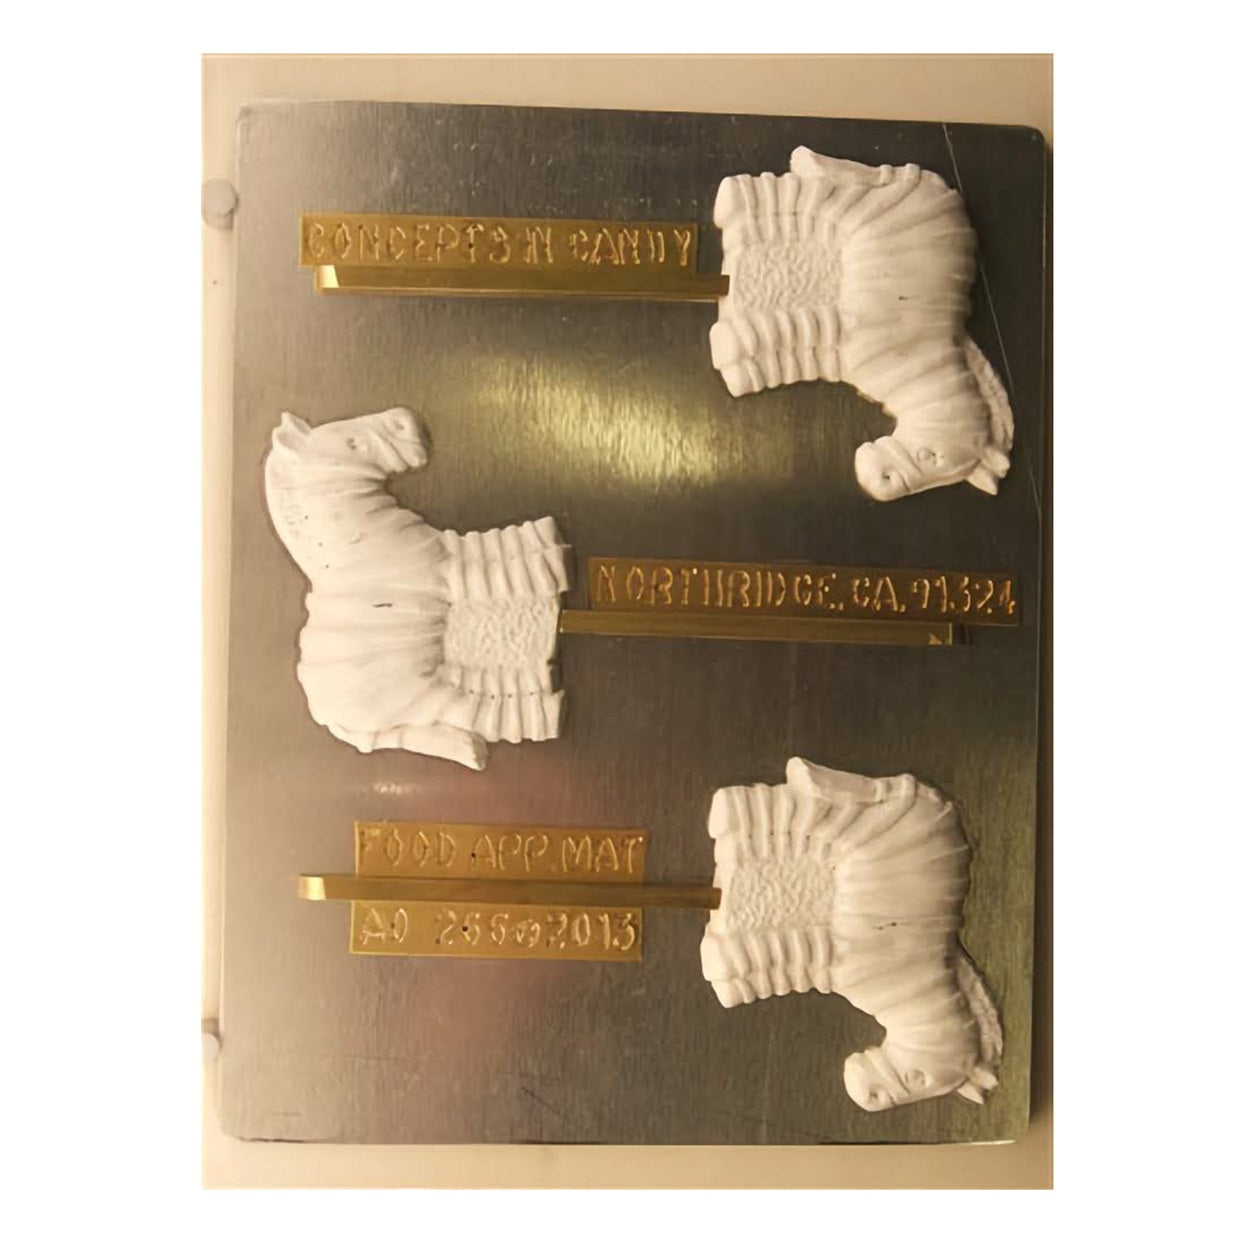 Lollipop mold featuring detailed zebra heads, designed for crafting zebra-shaped suckers, suitable for themed parties or animal-lover’s events.